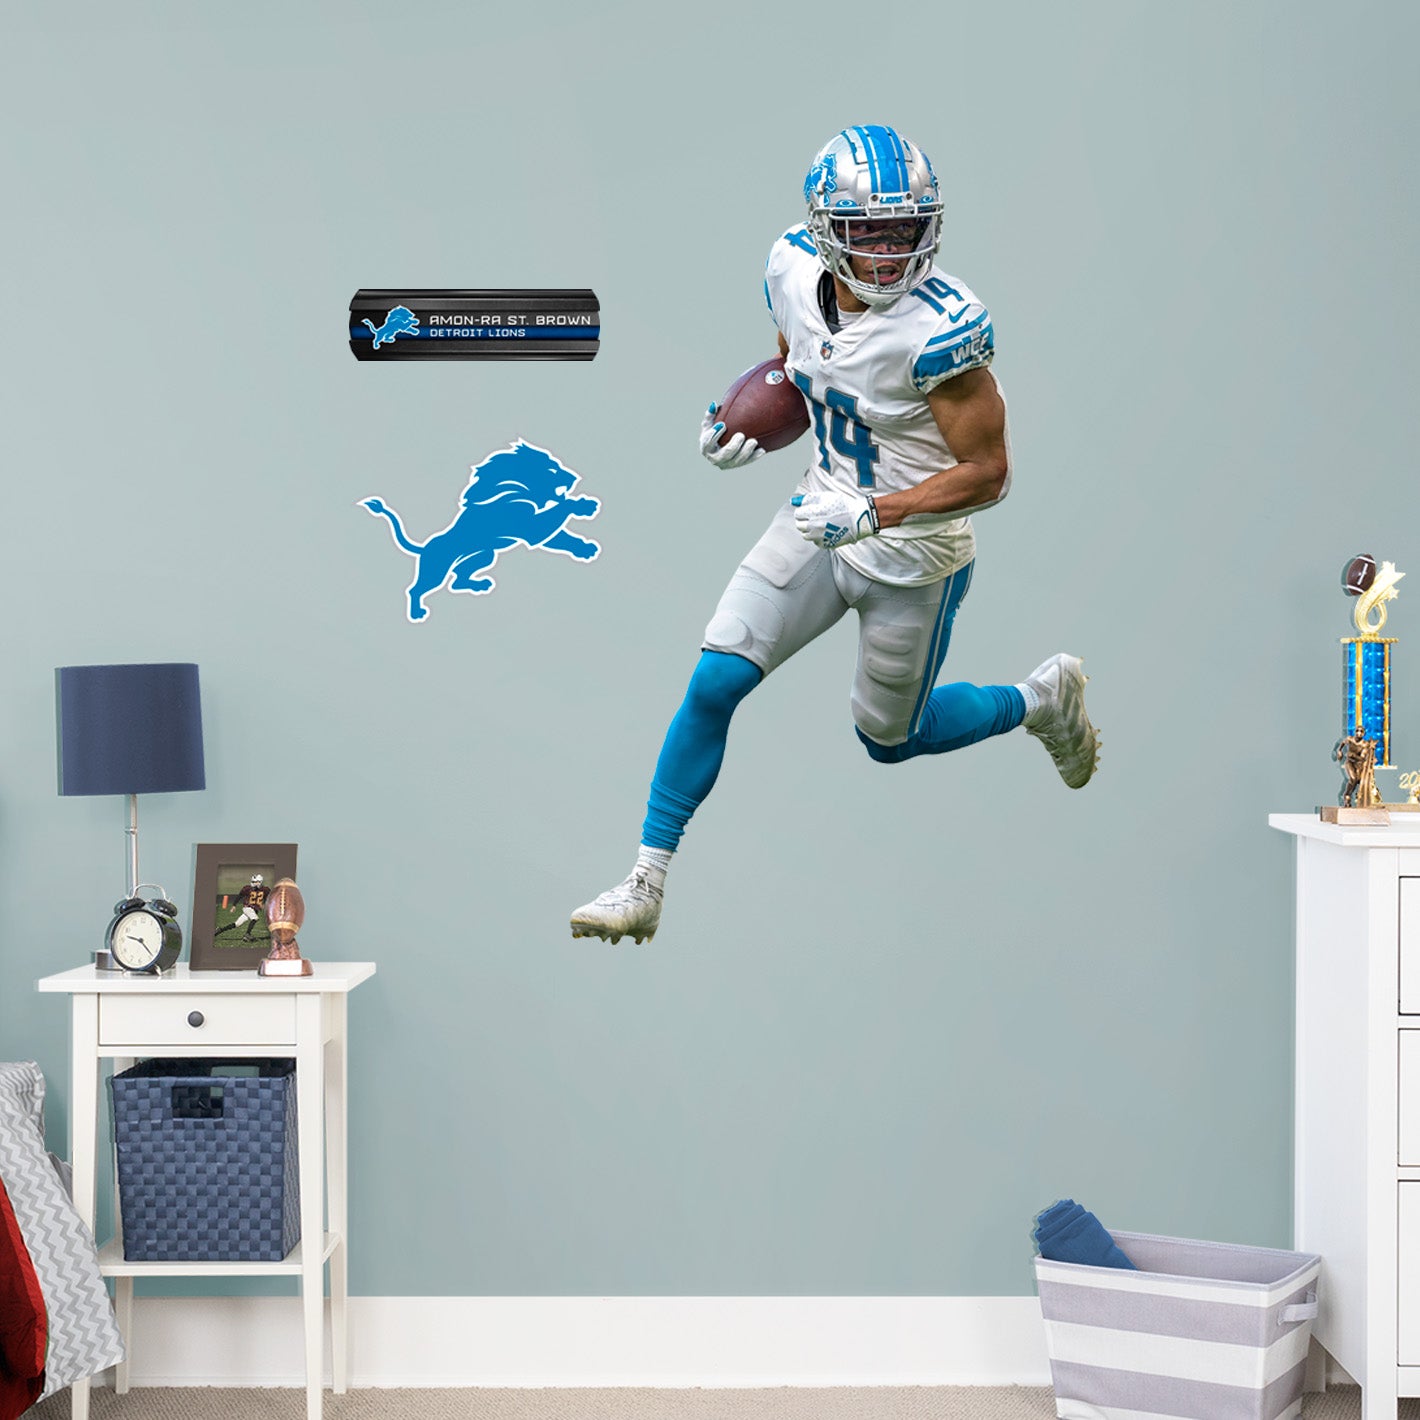 Detroit Lions: Amon-Ra St. Brown - Officially Licensed NFL Removable Adhesive Decal